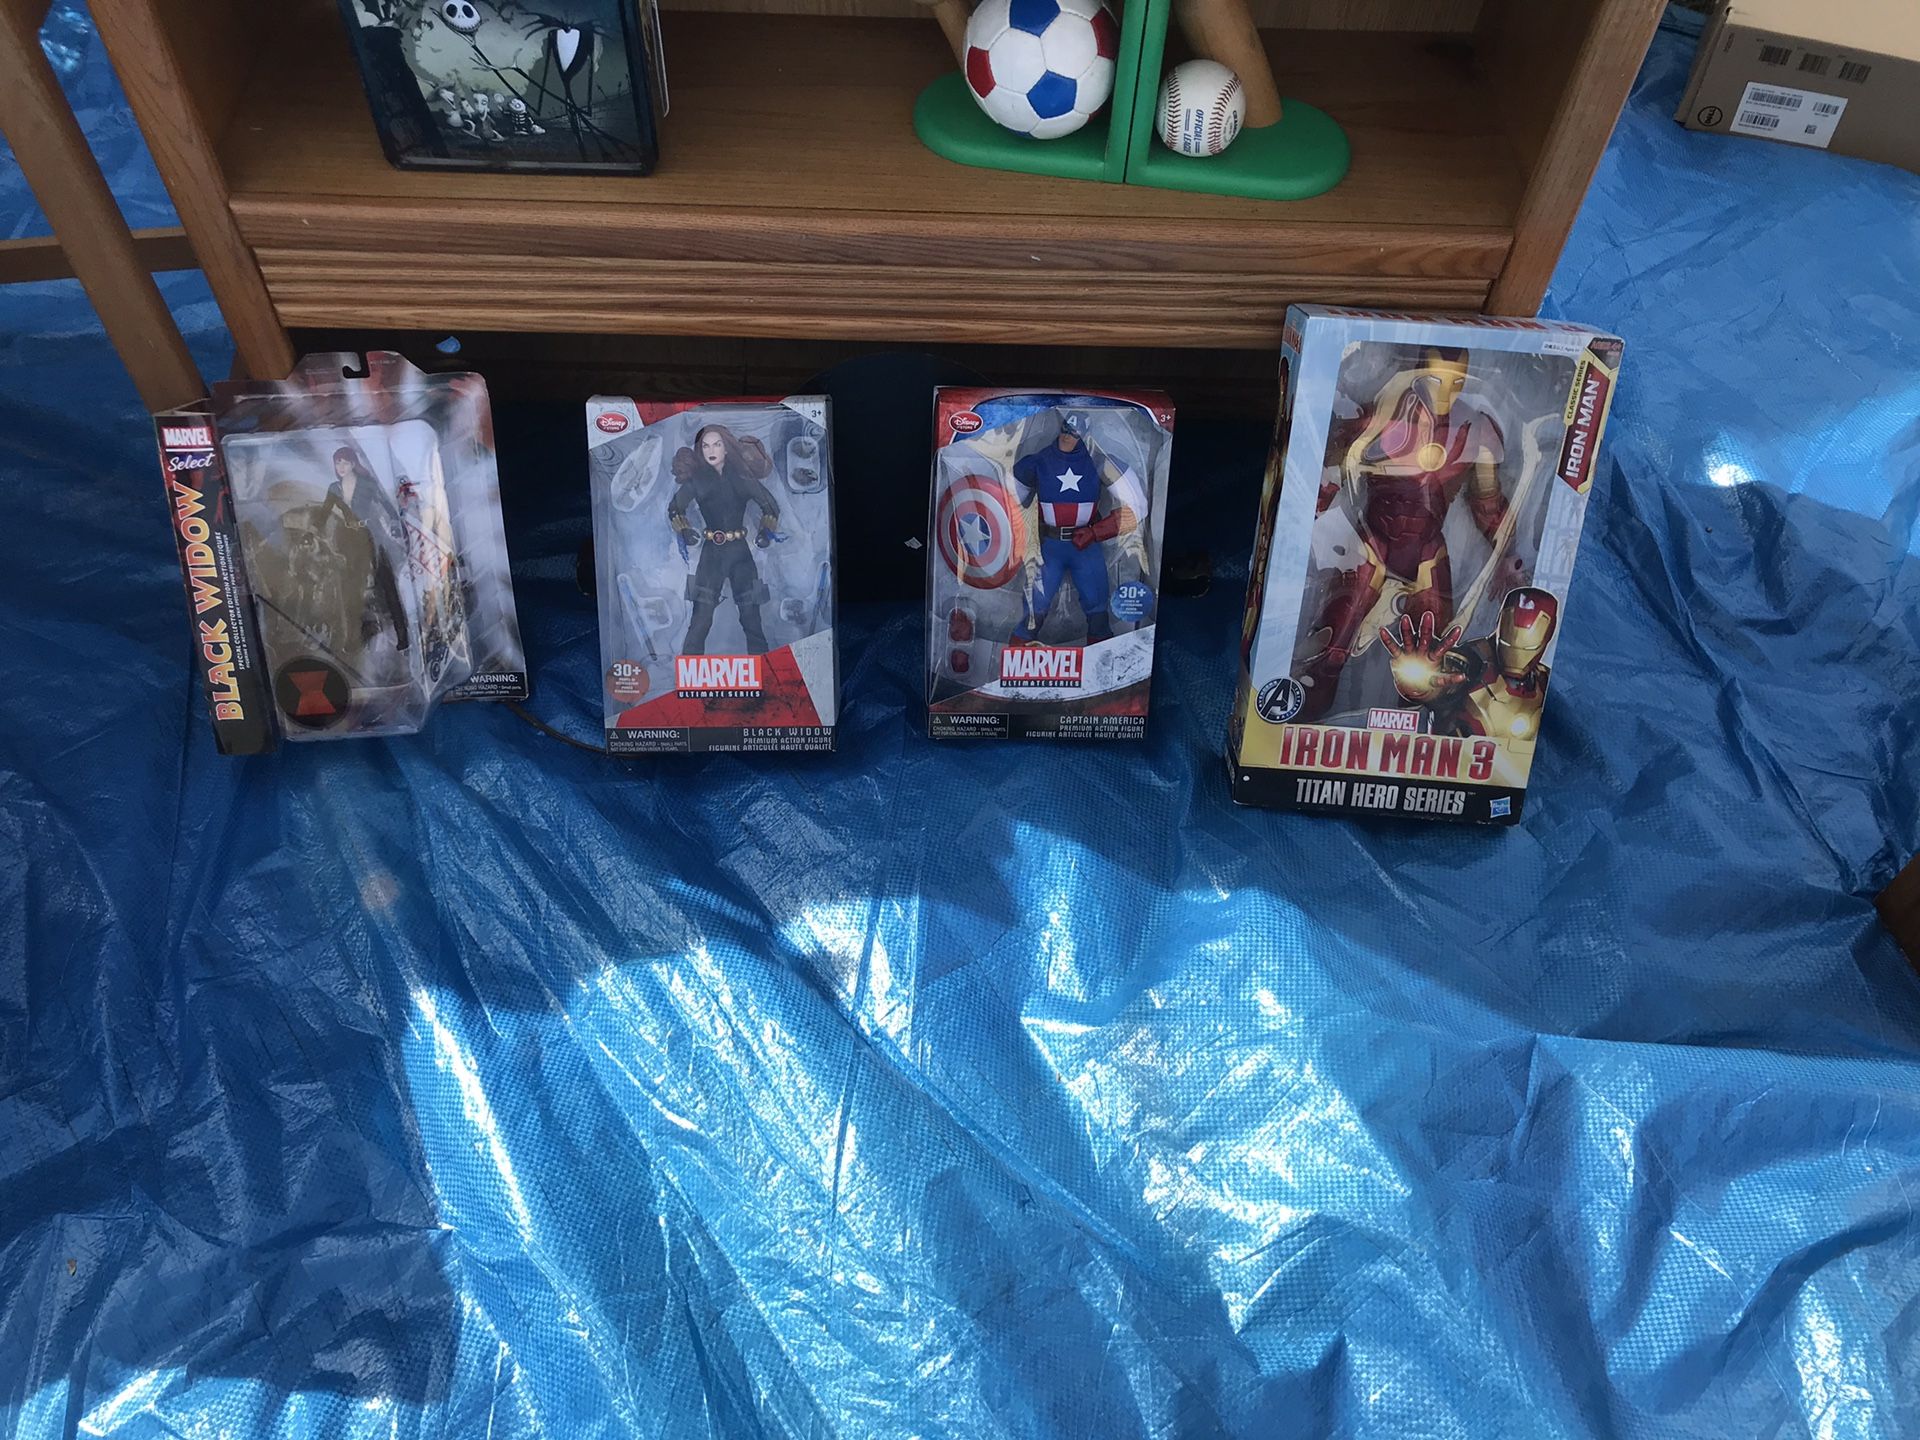 Marvel collectibles